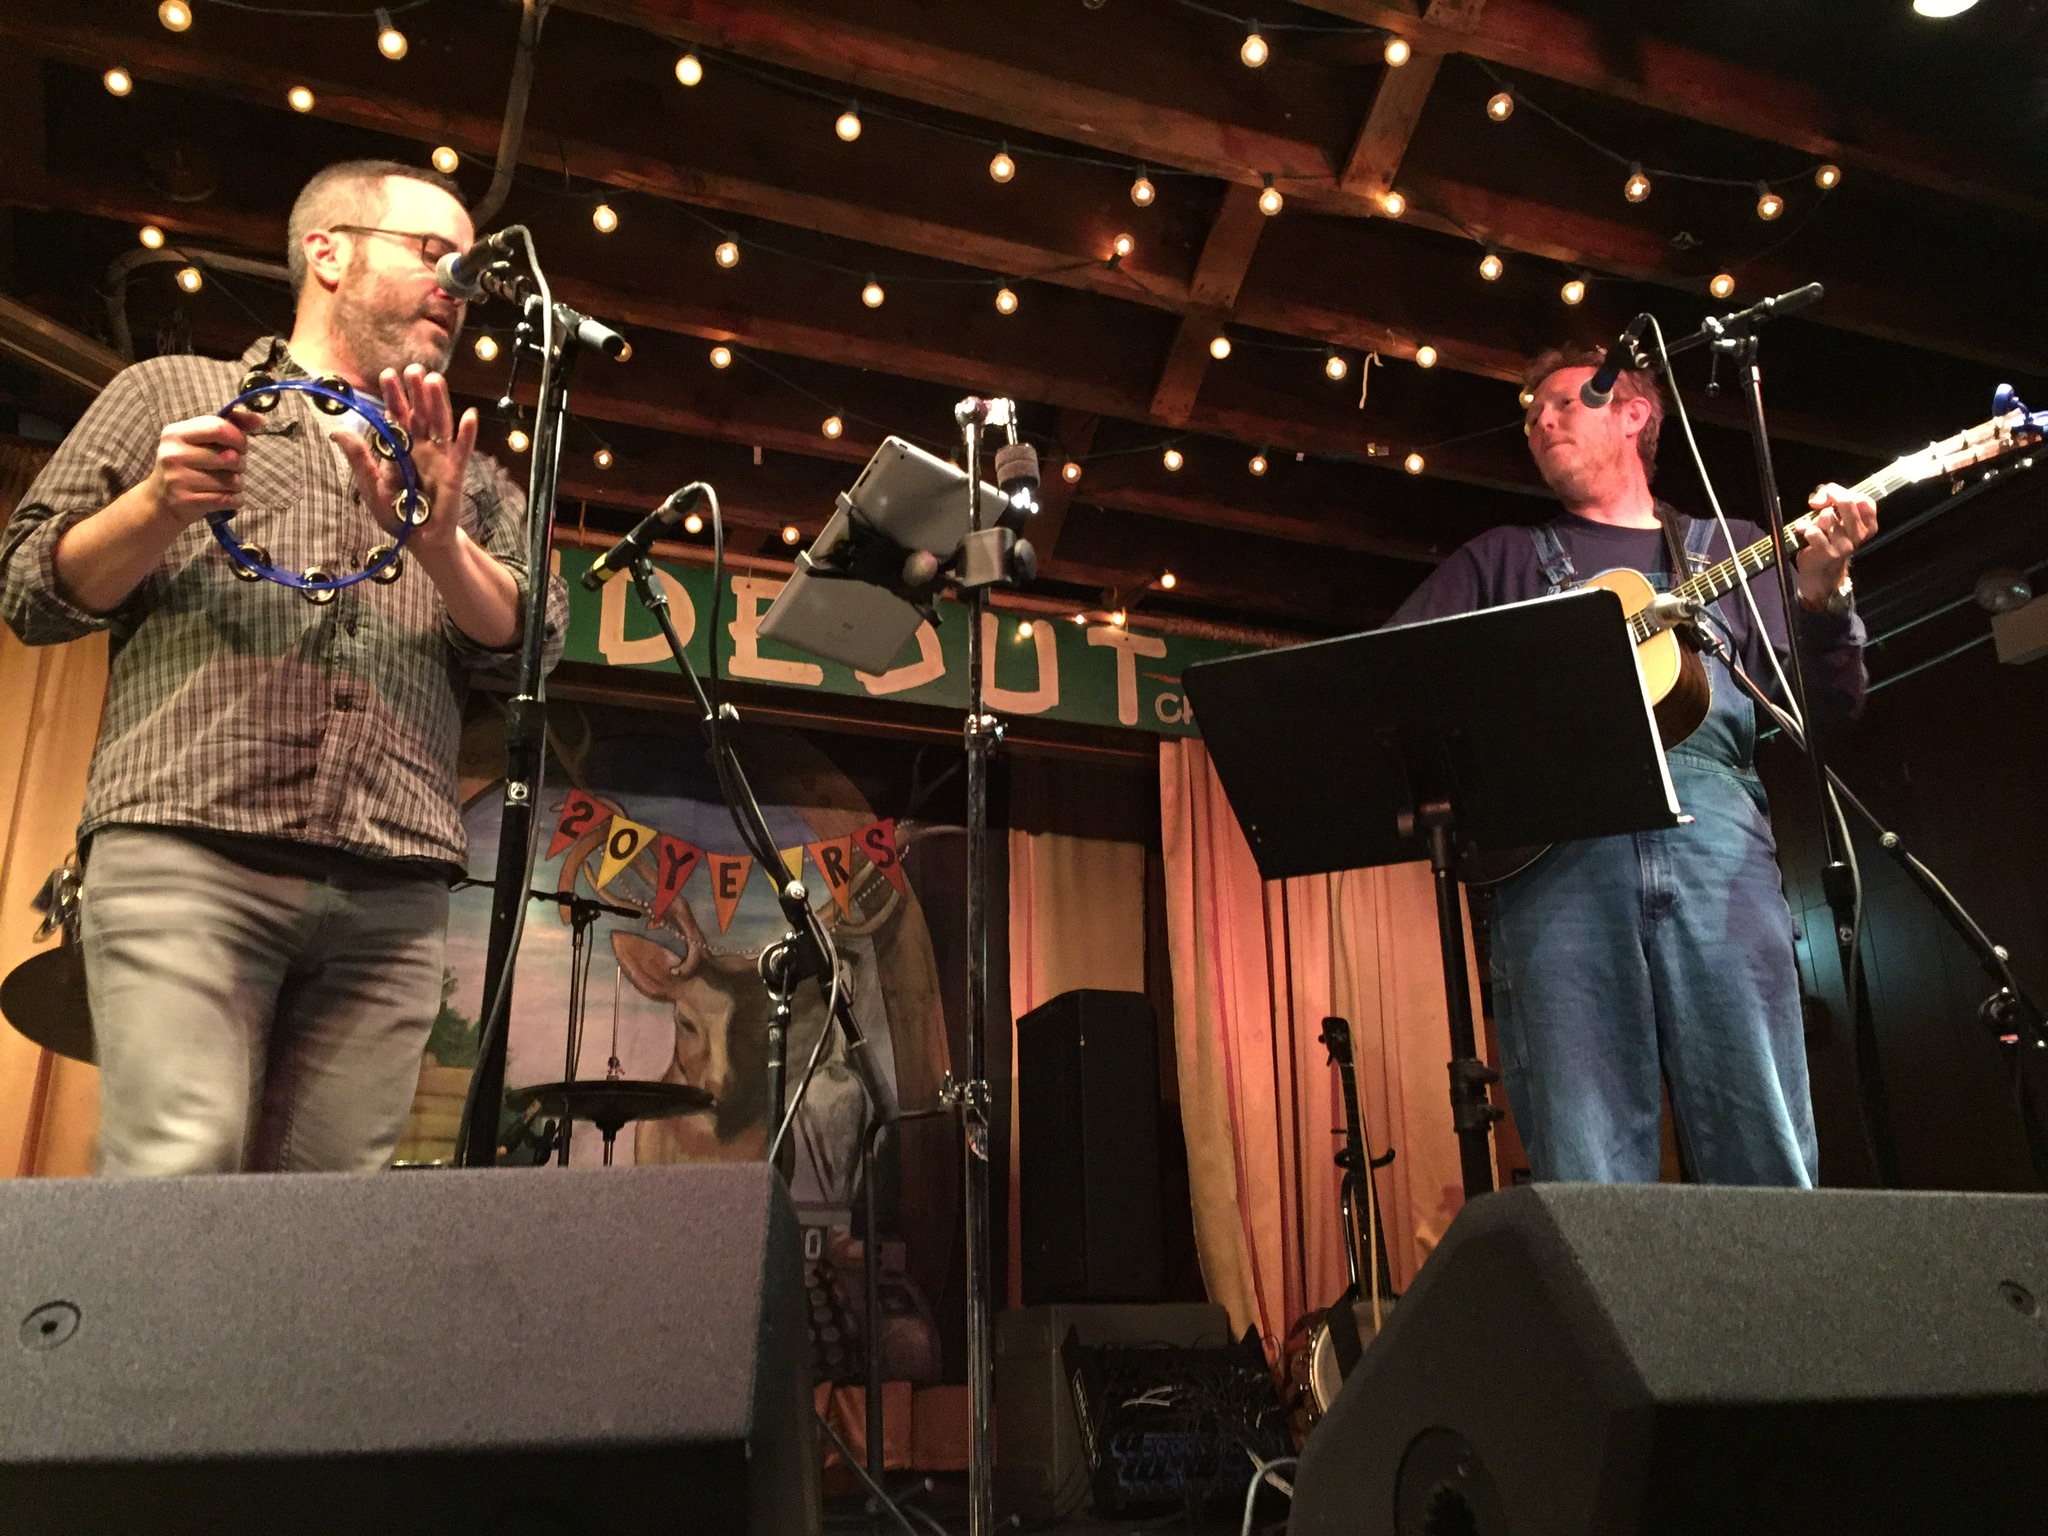 Gerald Dowd (left) and Robbie Fulks  singing 'Try Leaving' during their show at the Hideout.  Photo taken by and the property of FourWalls.